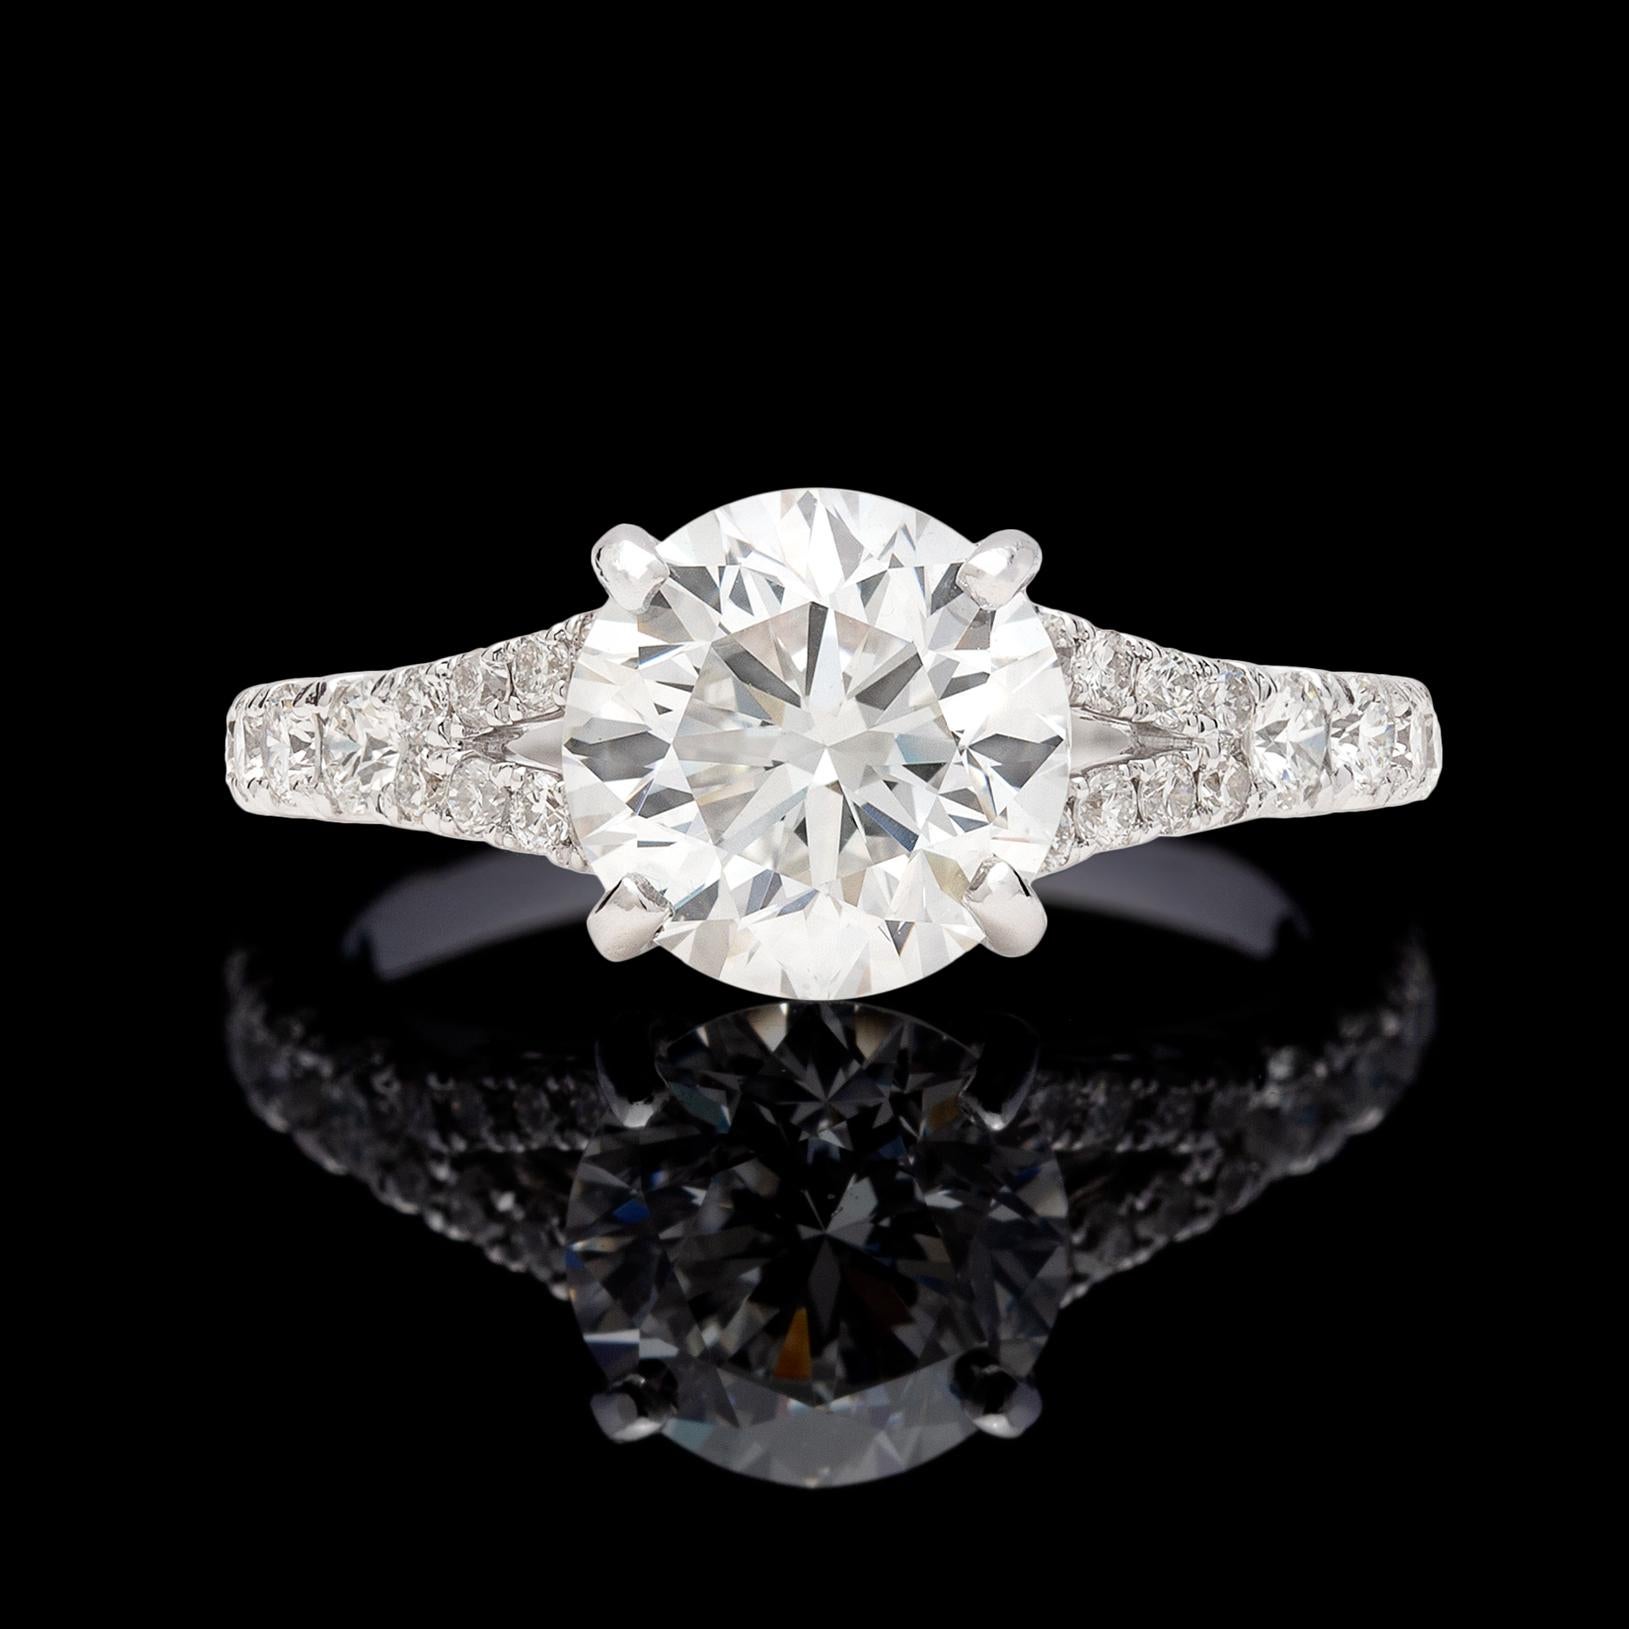 Gorgeous 18k white gold engagement ring featuring a sparkling 2.11-carats round brilliant-cut diamond, GIA F/SI1, with a split shank mounting set with 24 round brilliant-cut diamonds. Total weight for the ring is an estimated 2.51 carats. The ring